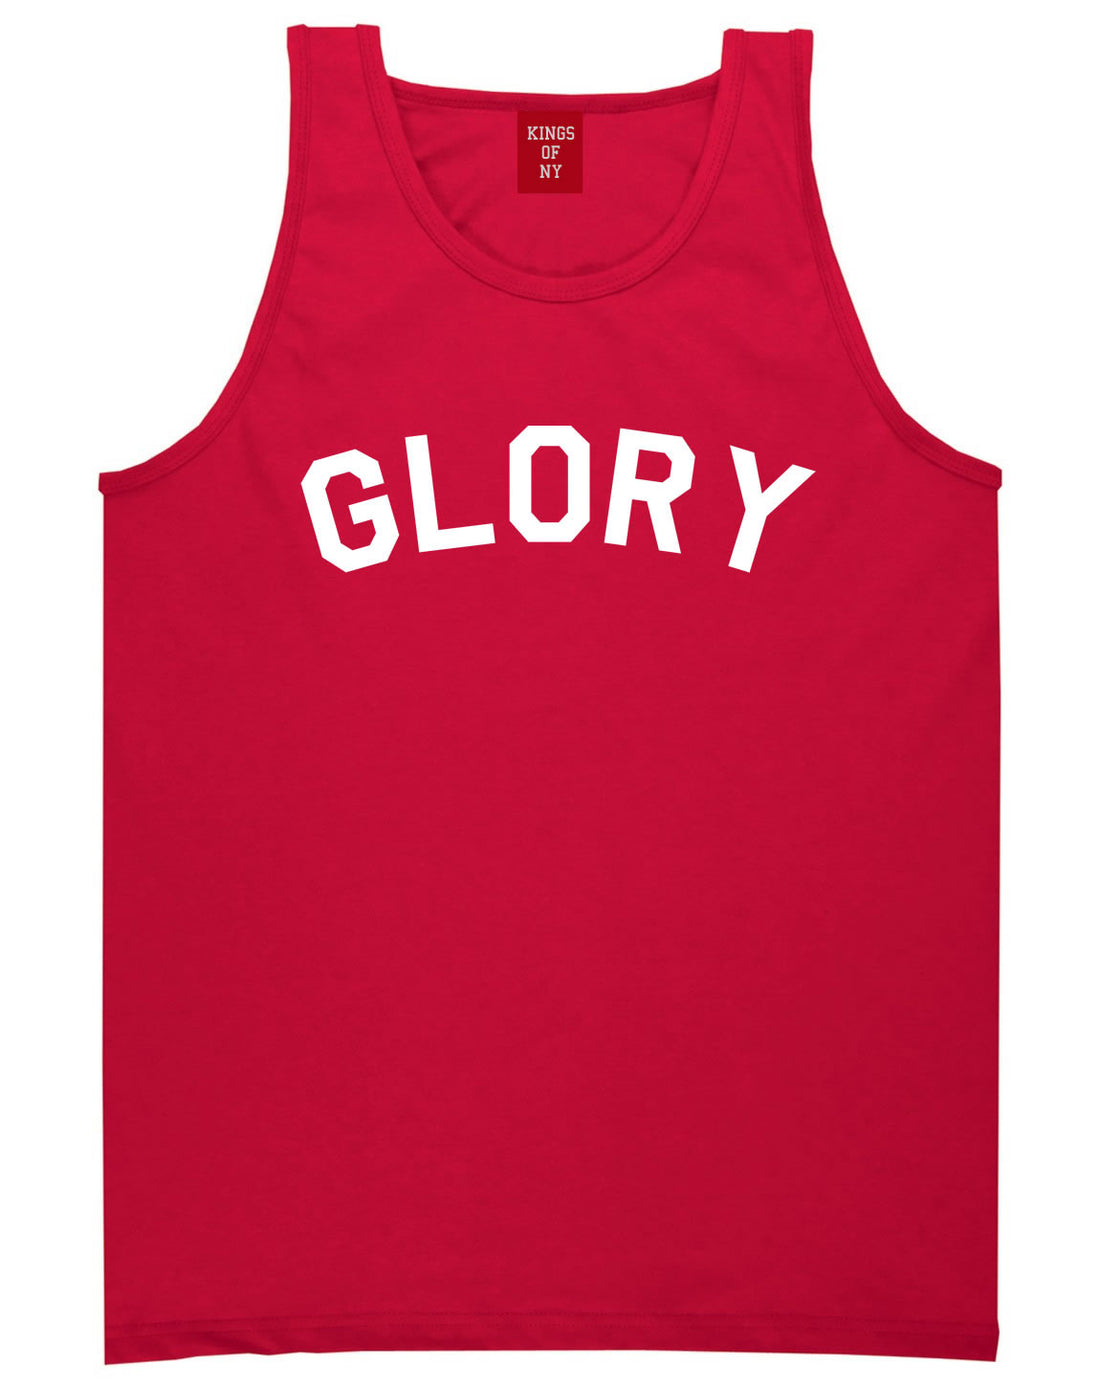 GLORY New York Champs Jersey Tank Top in Red